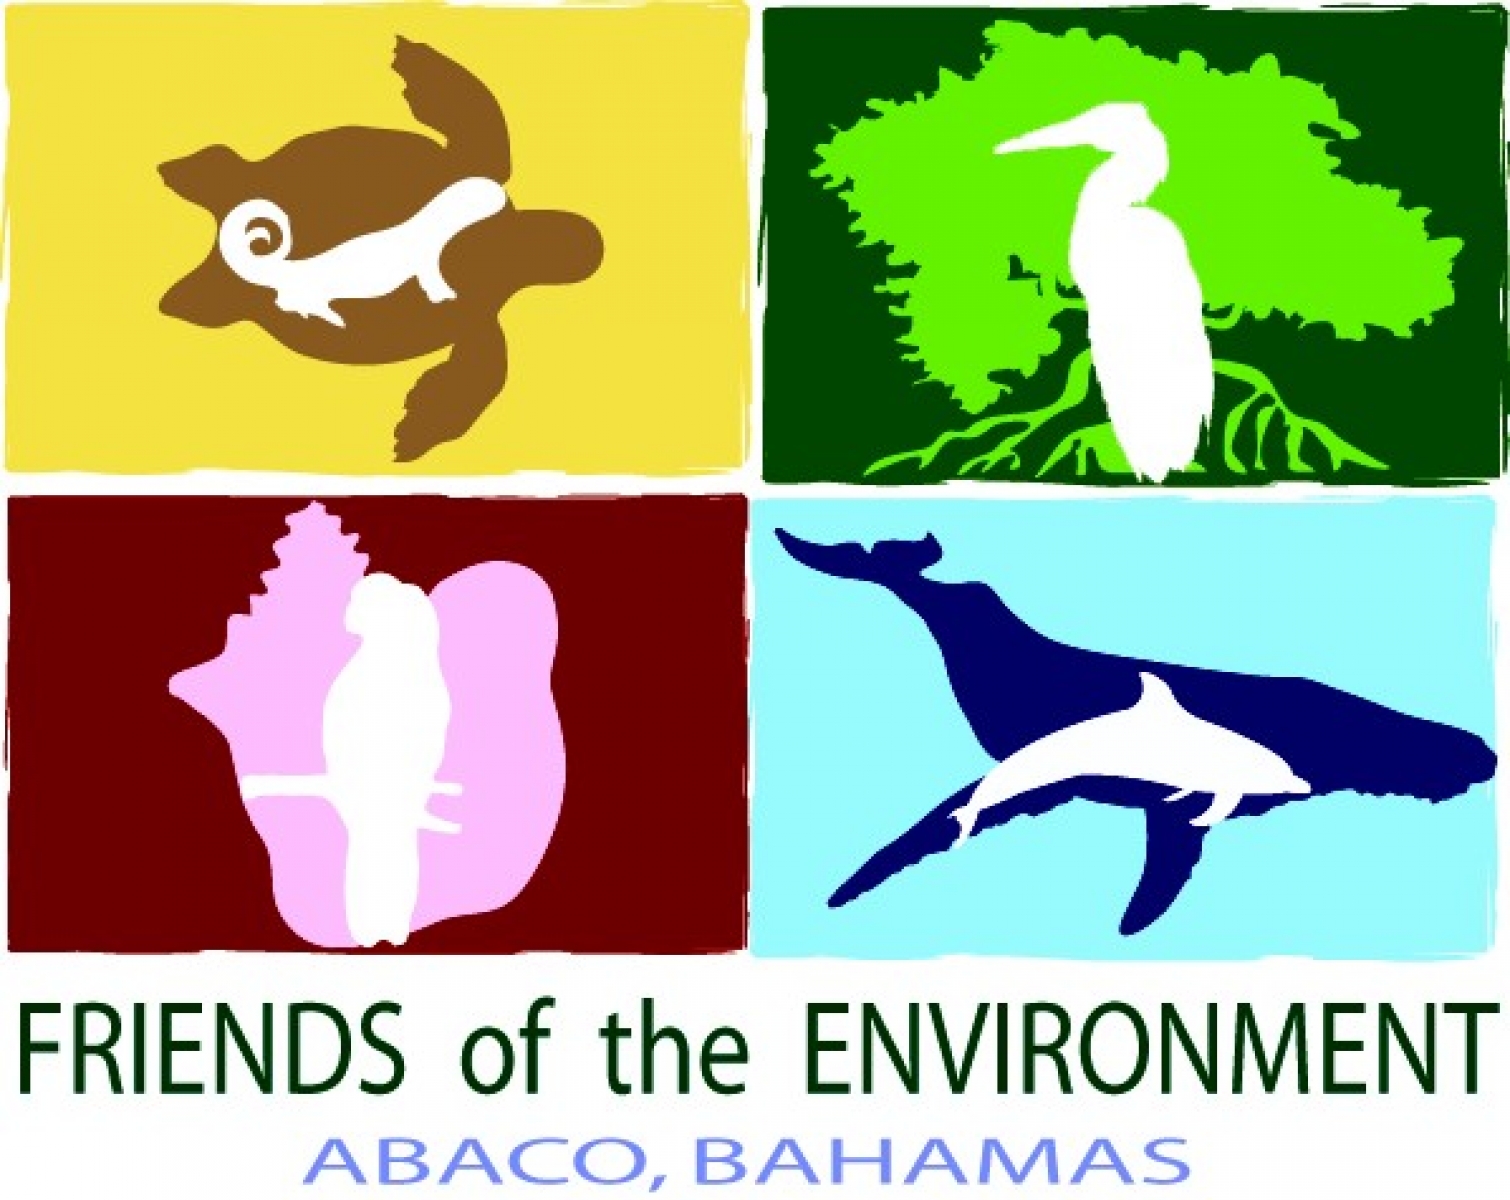 Friends of the Environment eCards